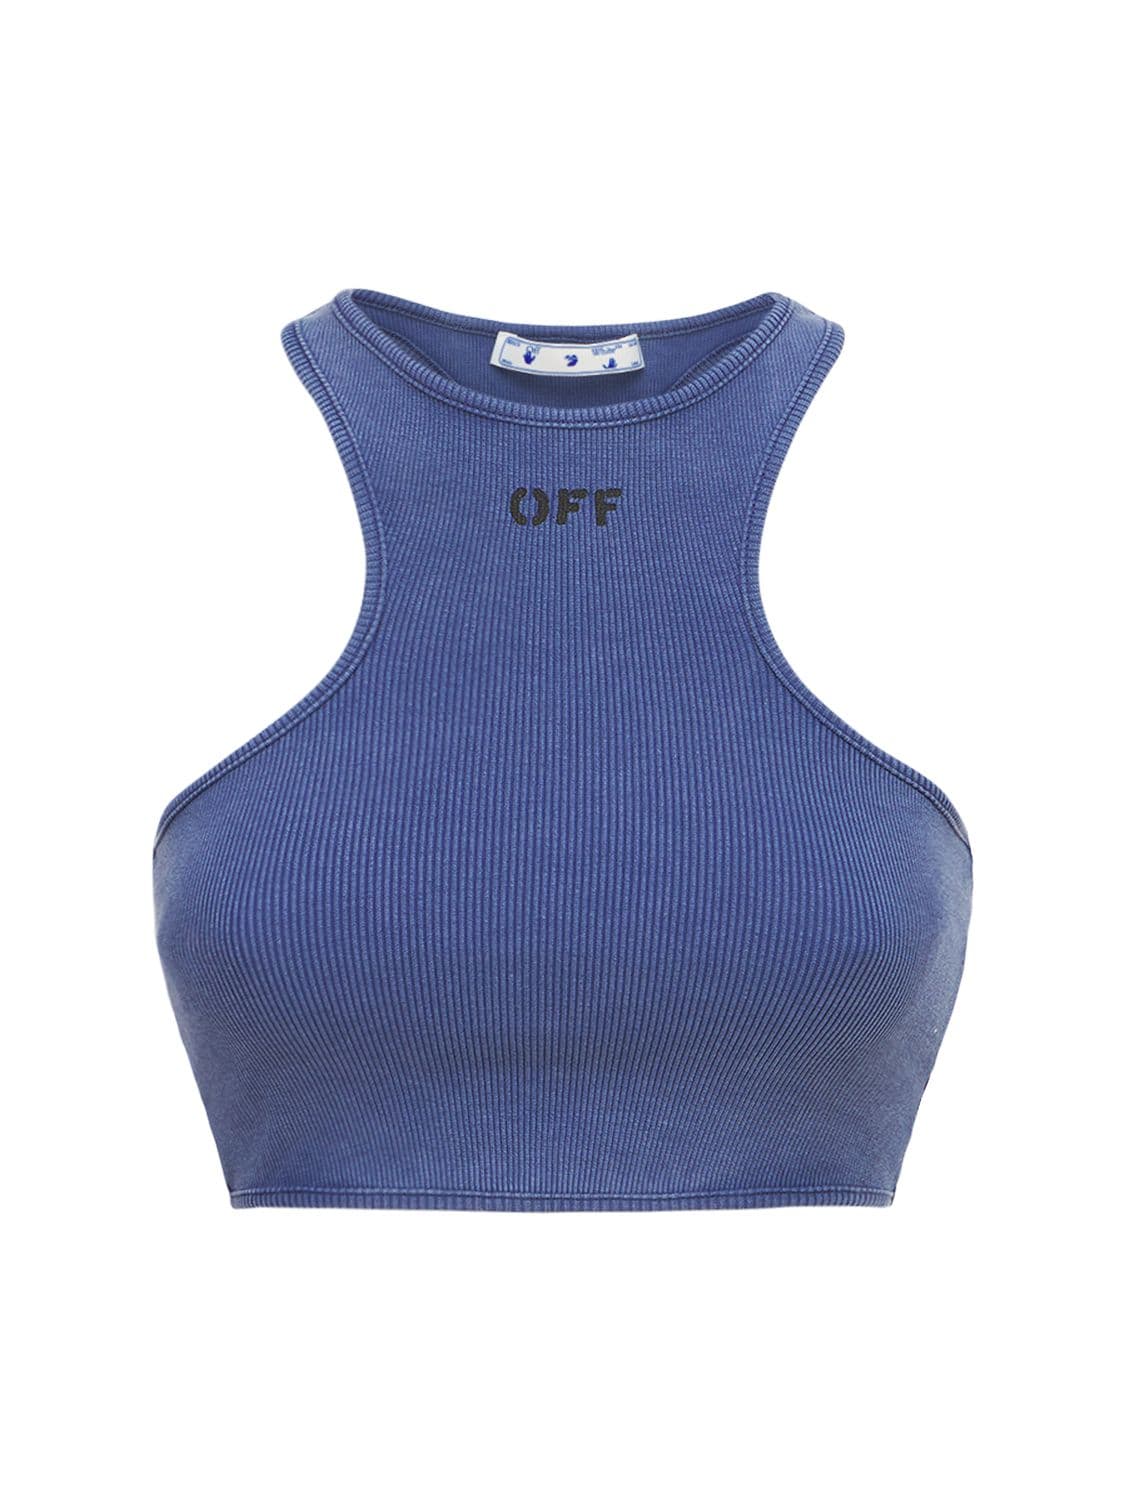 Lvr Exclusive Ribbed Cotton Rowing Top